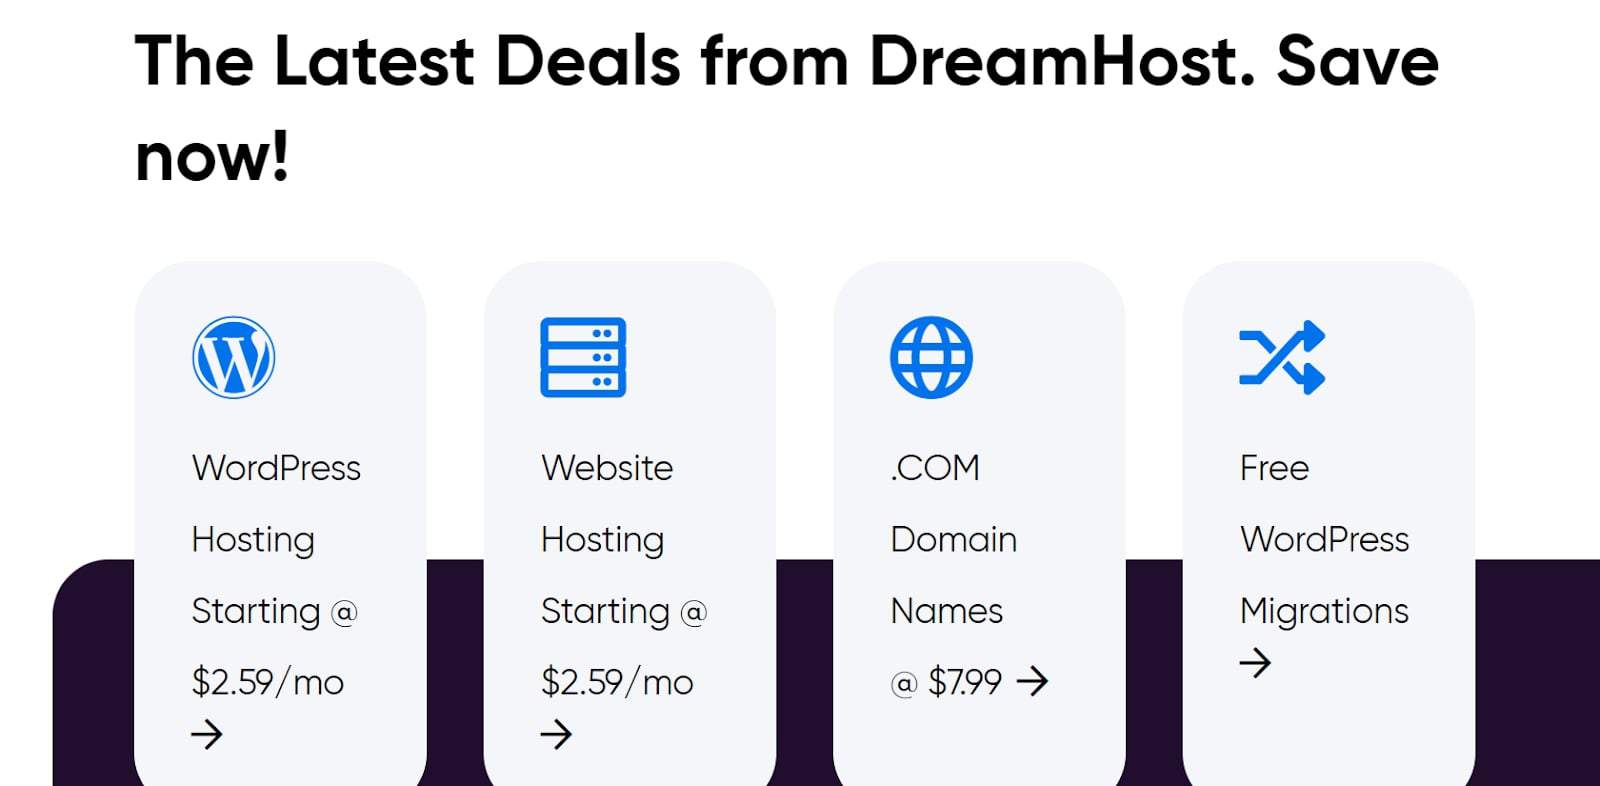 Our DreamHost review shows that it’s great for new WordPress website owners